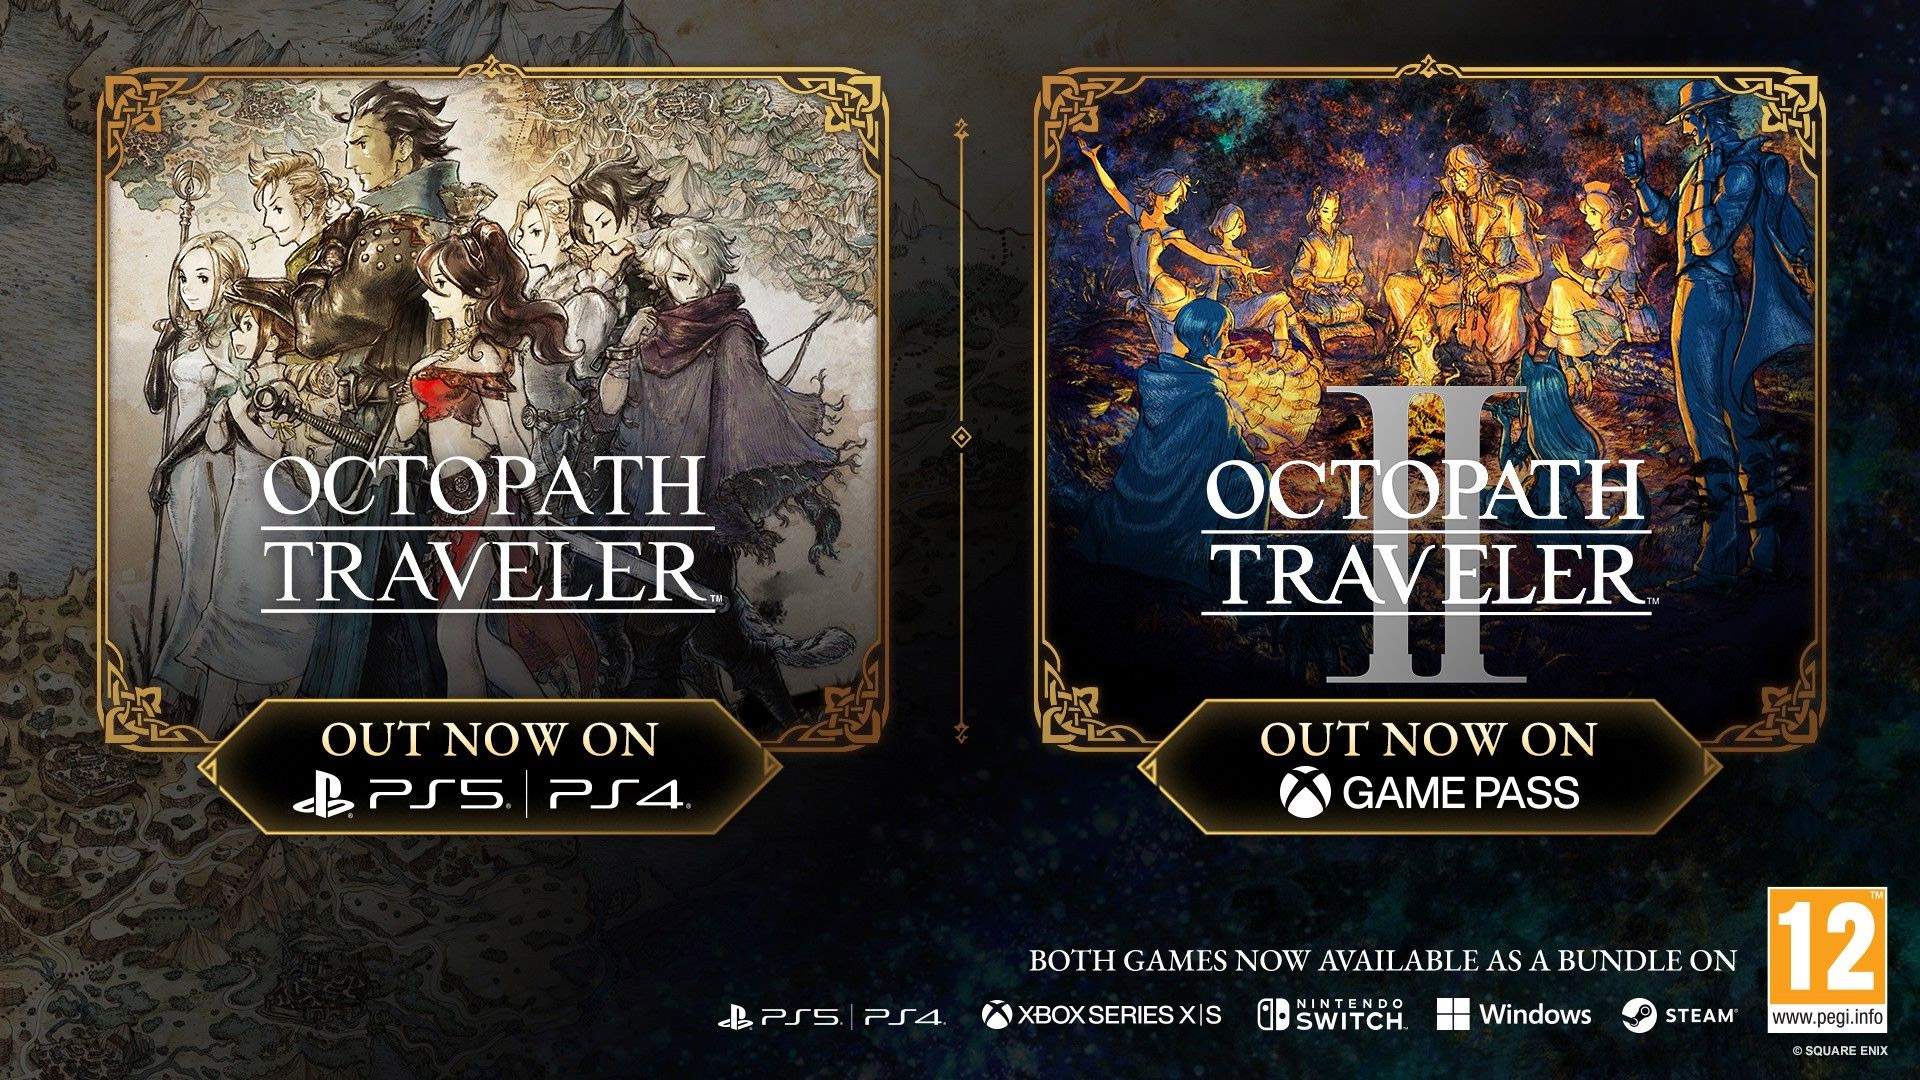 Beautyshot with OCTOPATH TRAVELER I out now on PS5/PS4 and OCTOPATH TRAVELER II out now on Game Pass